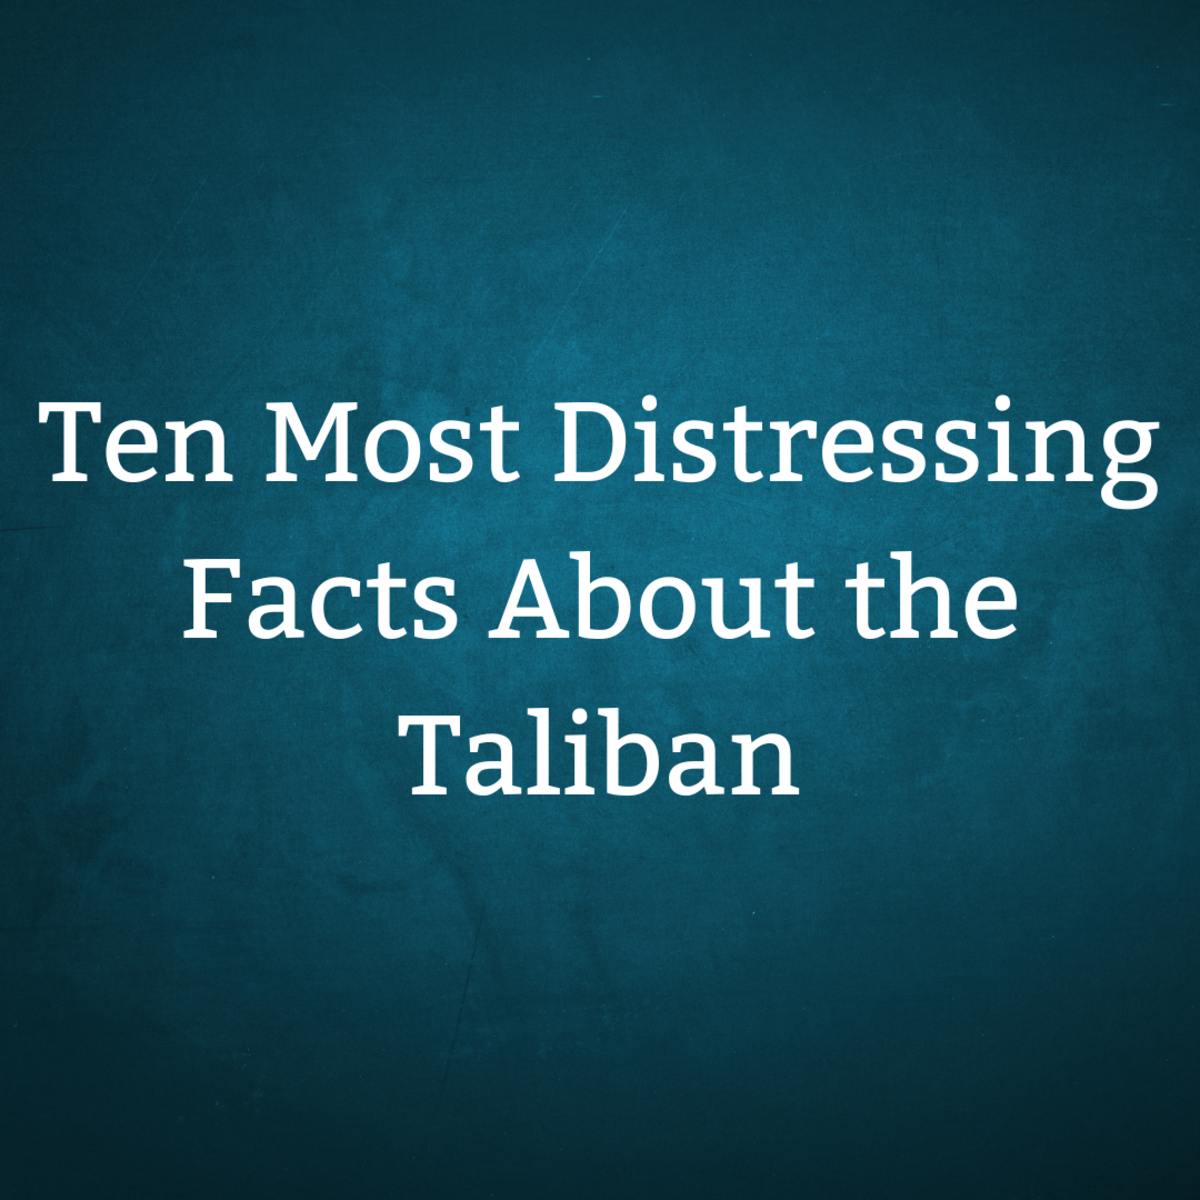 Ten of the most distressing facts about the Taliban. 